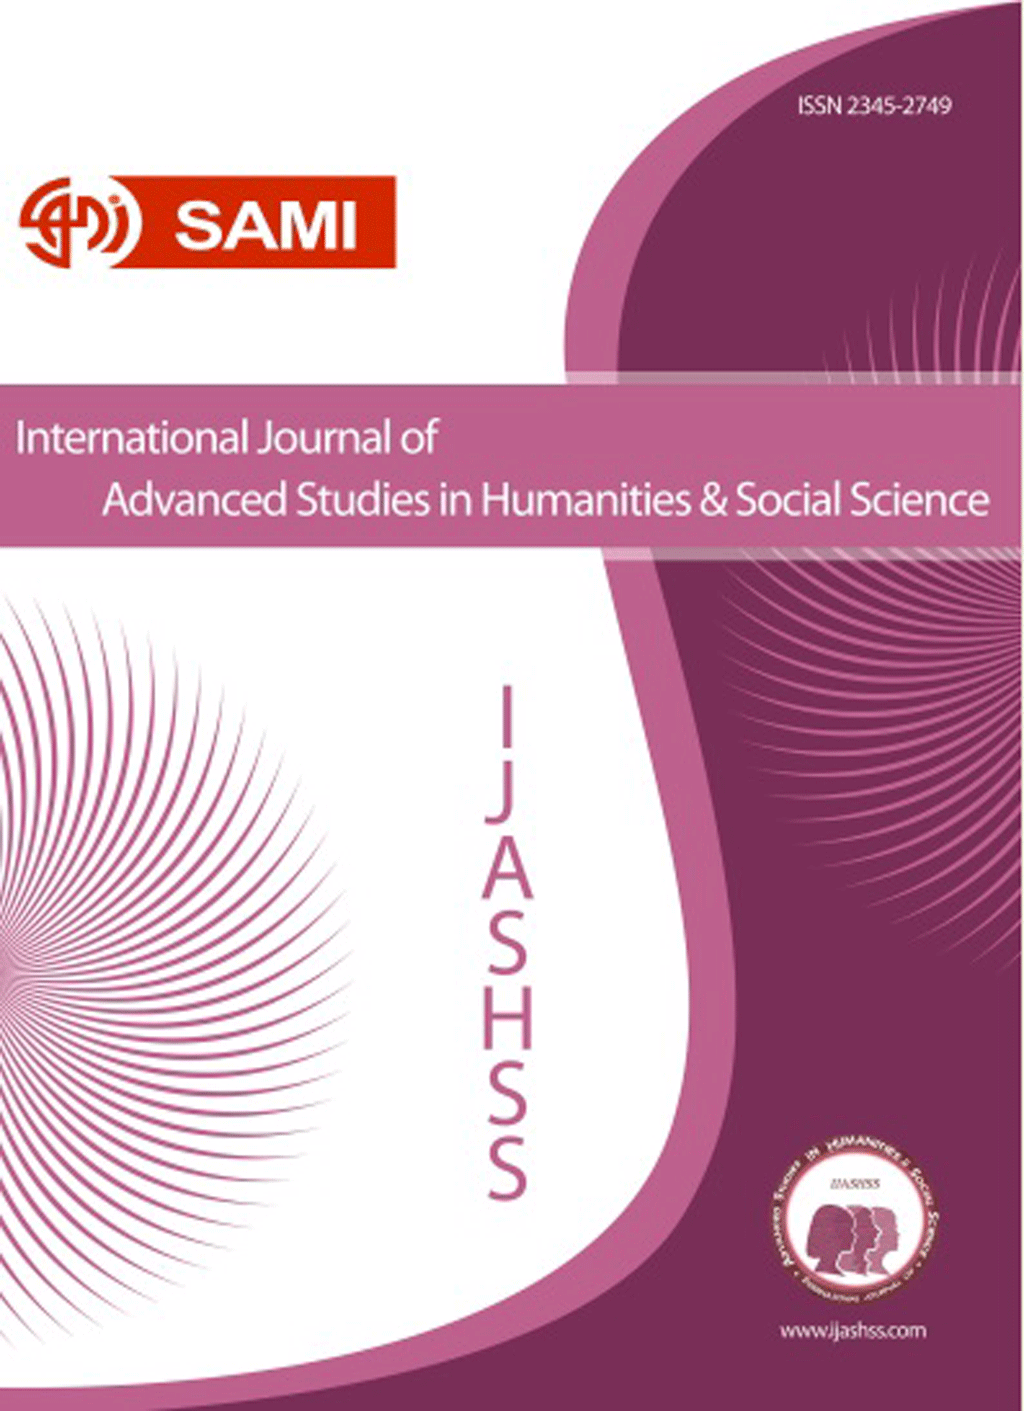 International Journal of Advanced Studies in Humanities and Social Science - April 2017, Volume 6 - Issue 2